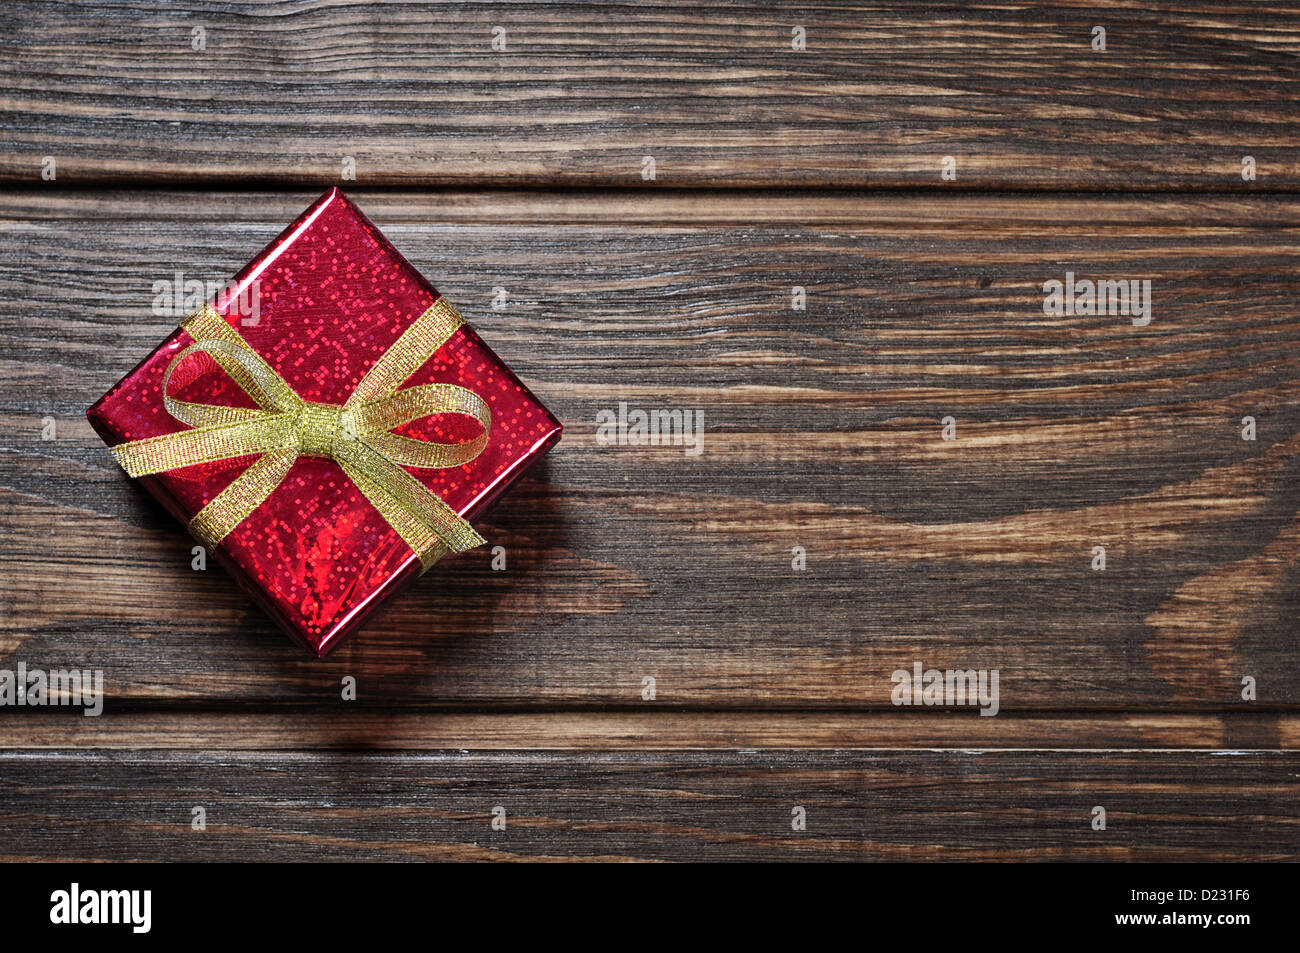 Red gif box with golden ribbon on wooden background Stock Photo